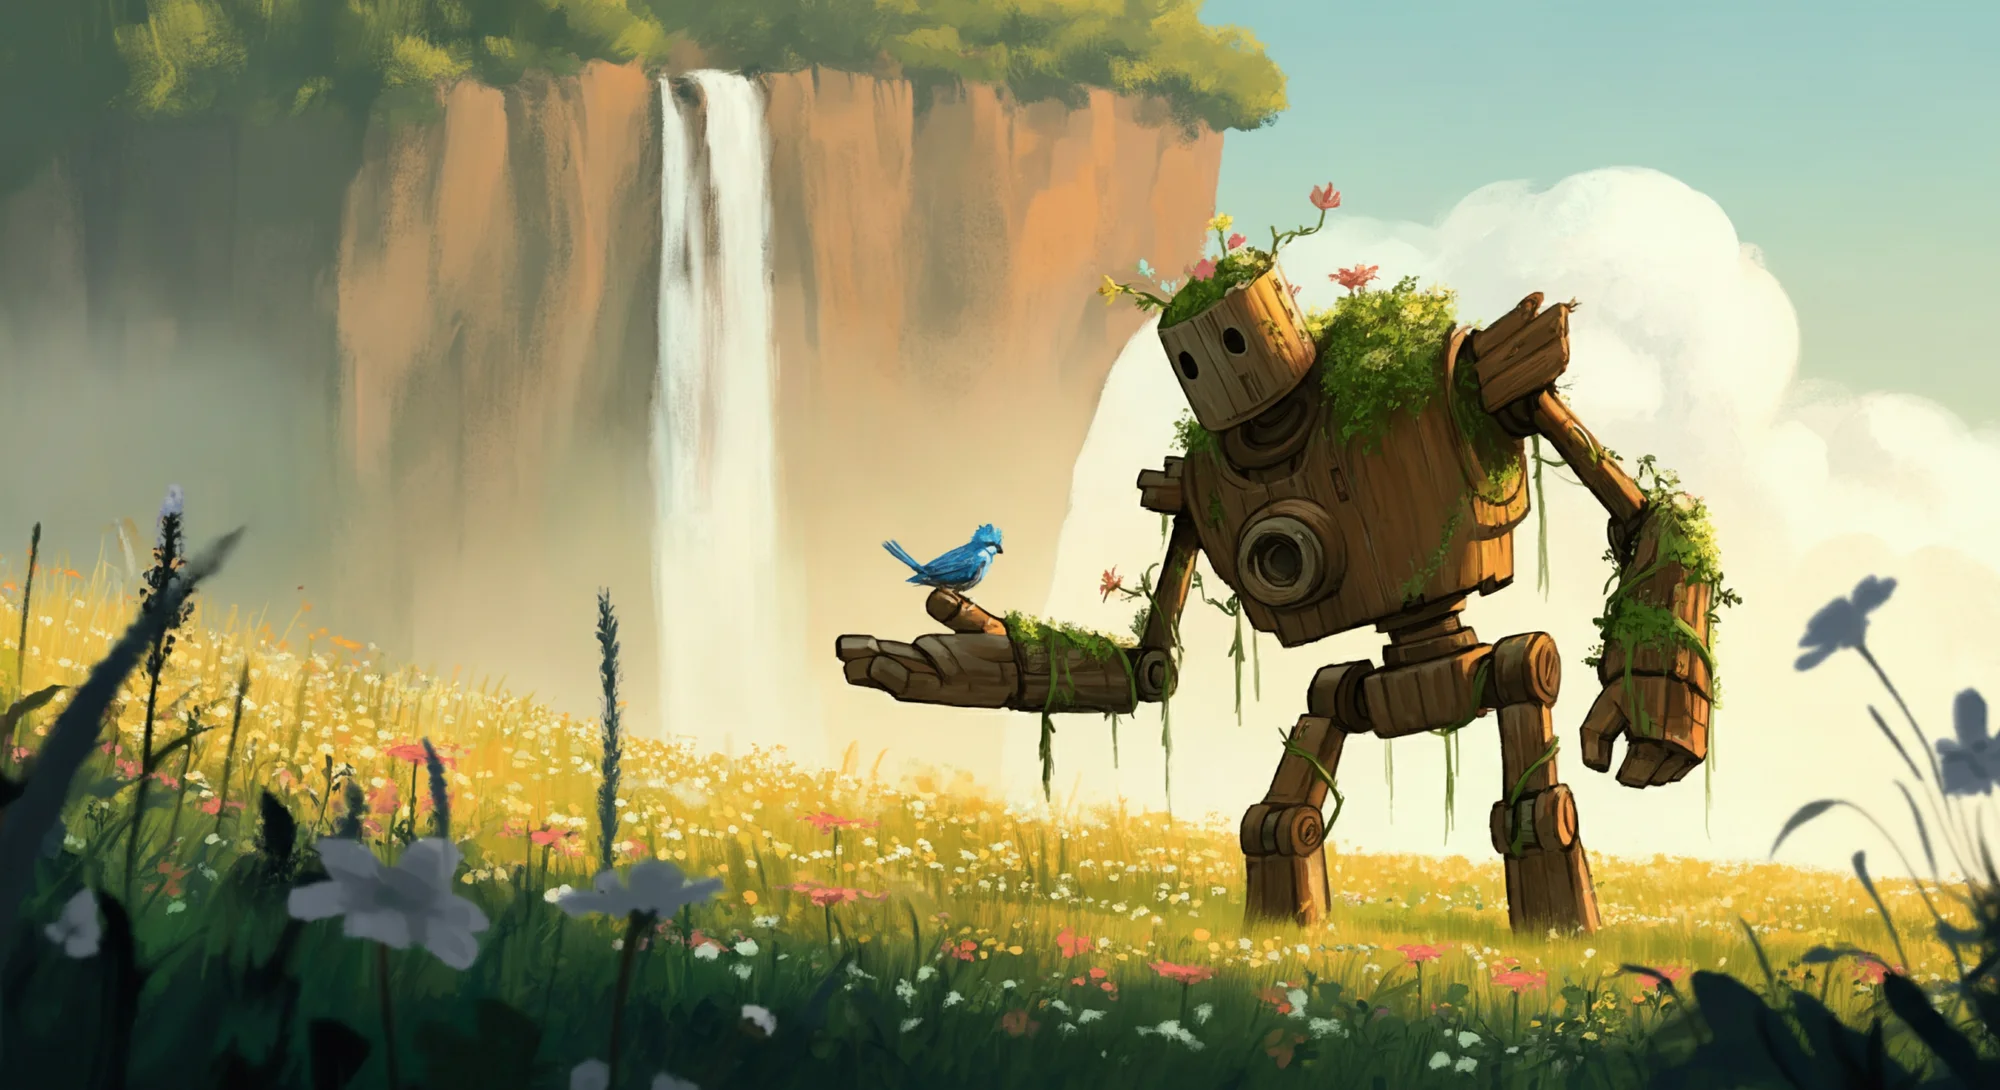 A weathered, wooden mech robot covered in flowering vines stands peacefully in a field of tall wildflowers, with a small bluebird resting on its outstretched hand. Digital cartoon, with warm colors and soft lines. A large cliff with waterfall looms behind.